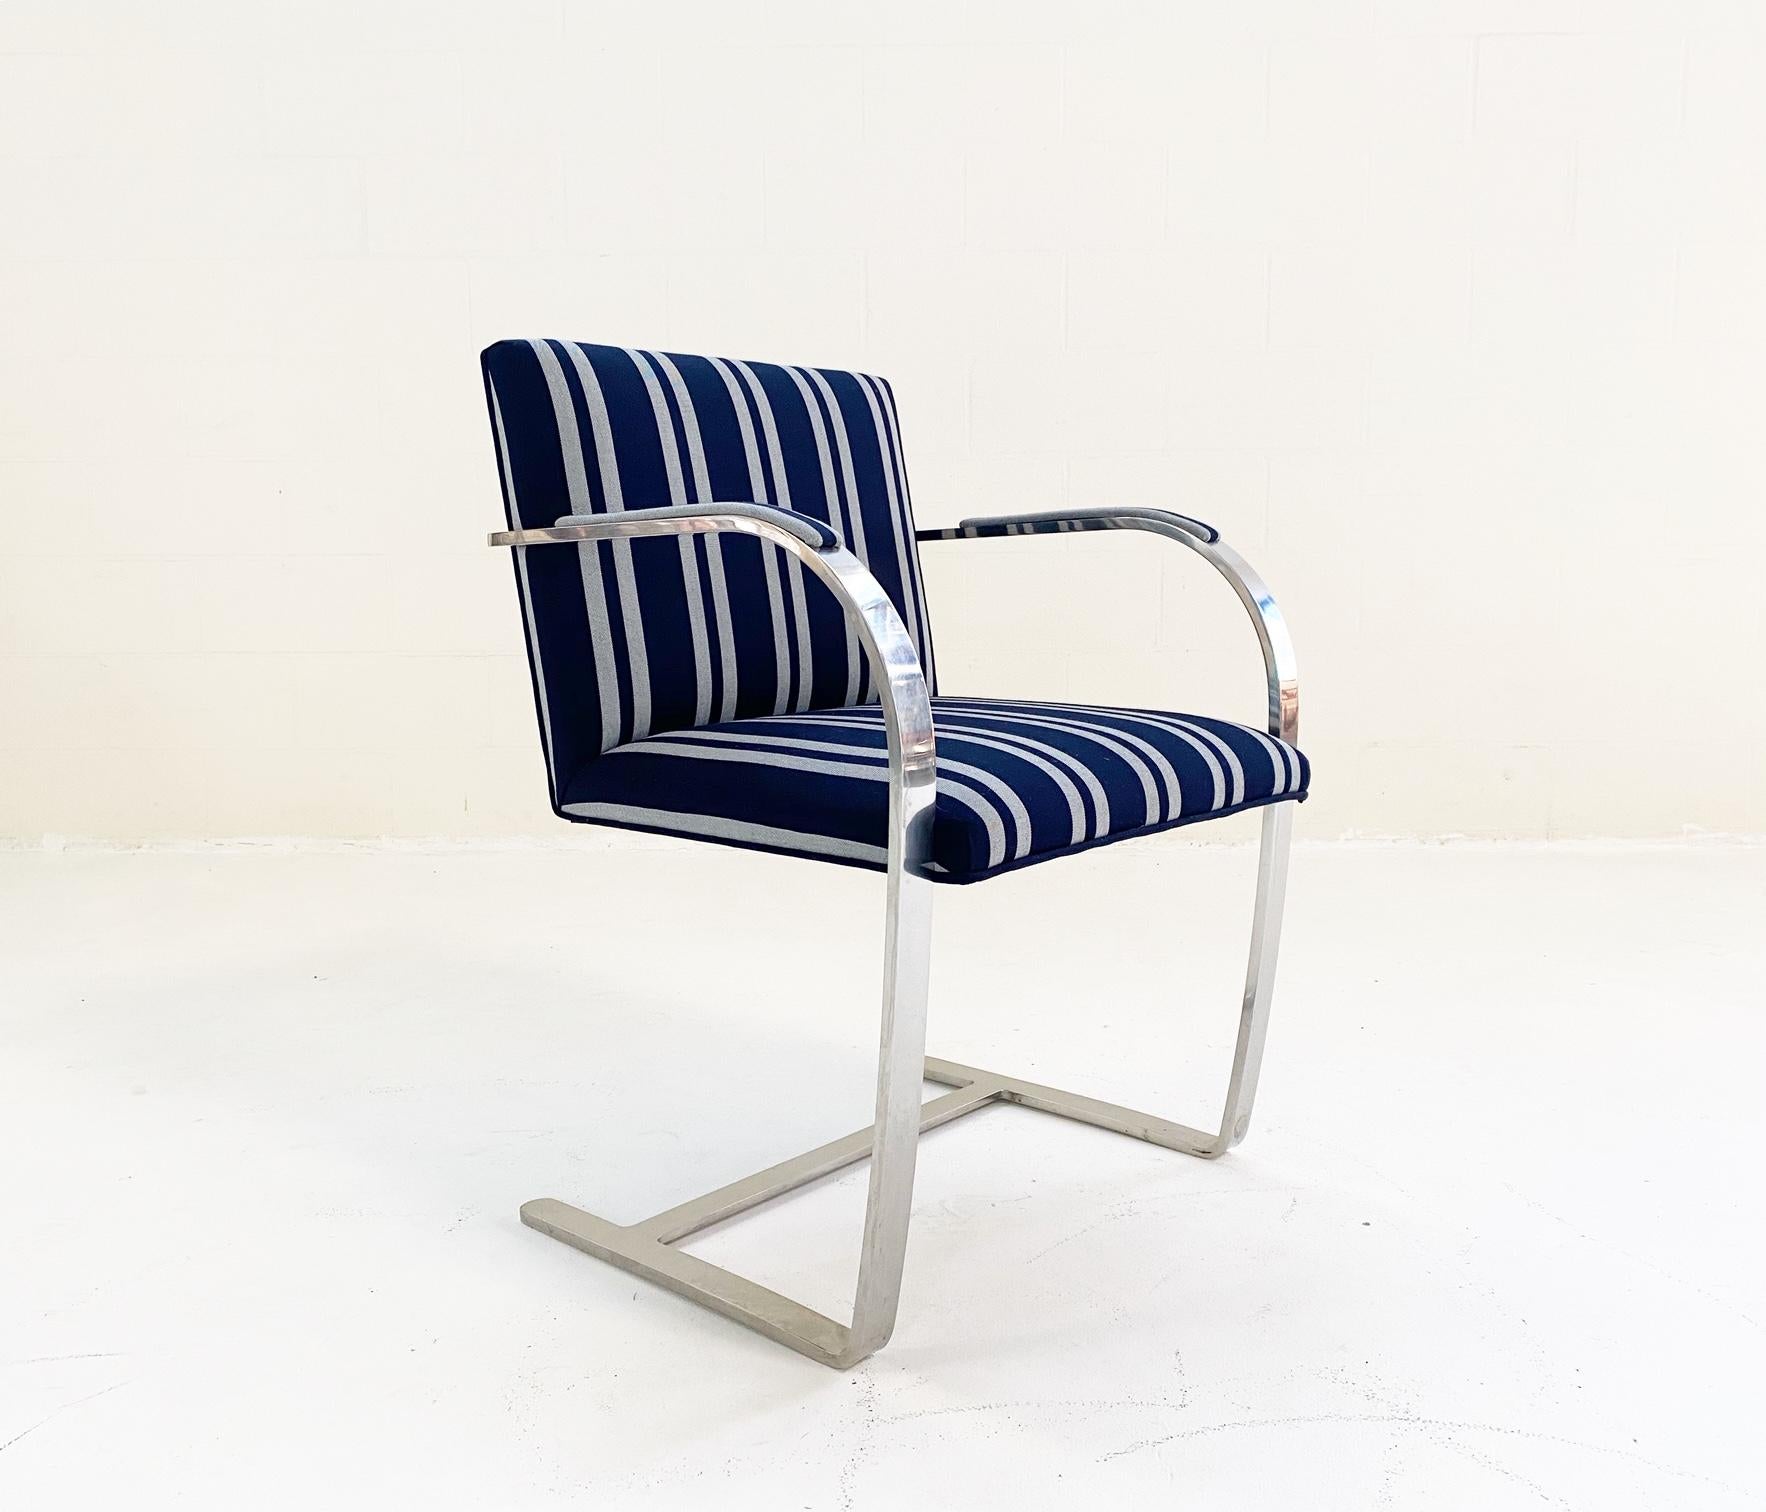 KULE x Forsyth Collection Ludwig Mies van der Rohe Brno Chair 1